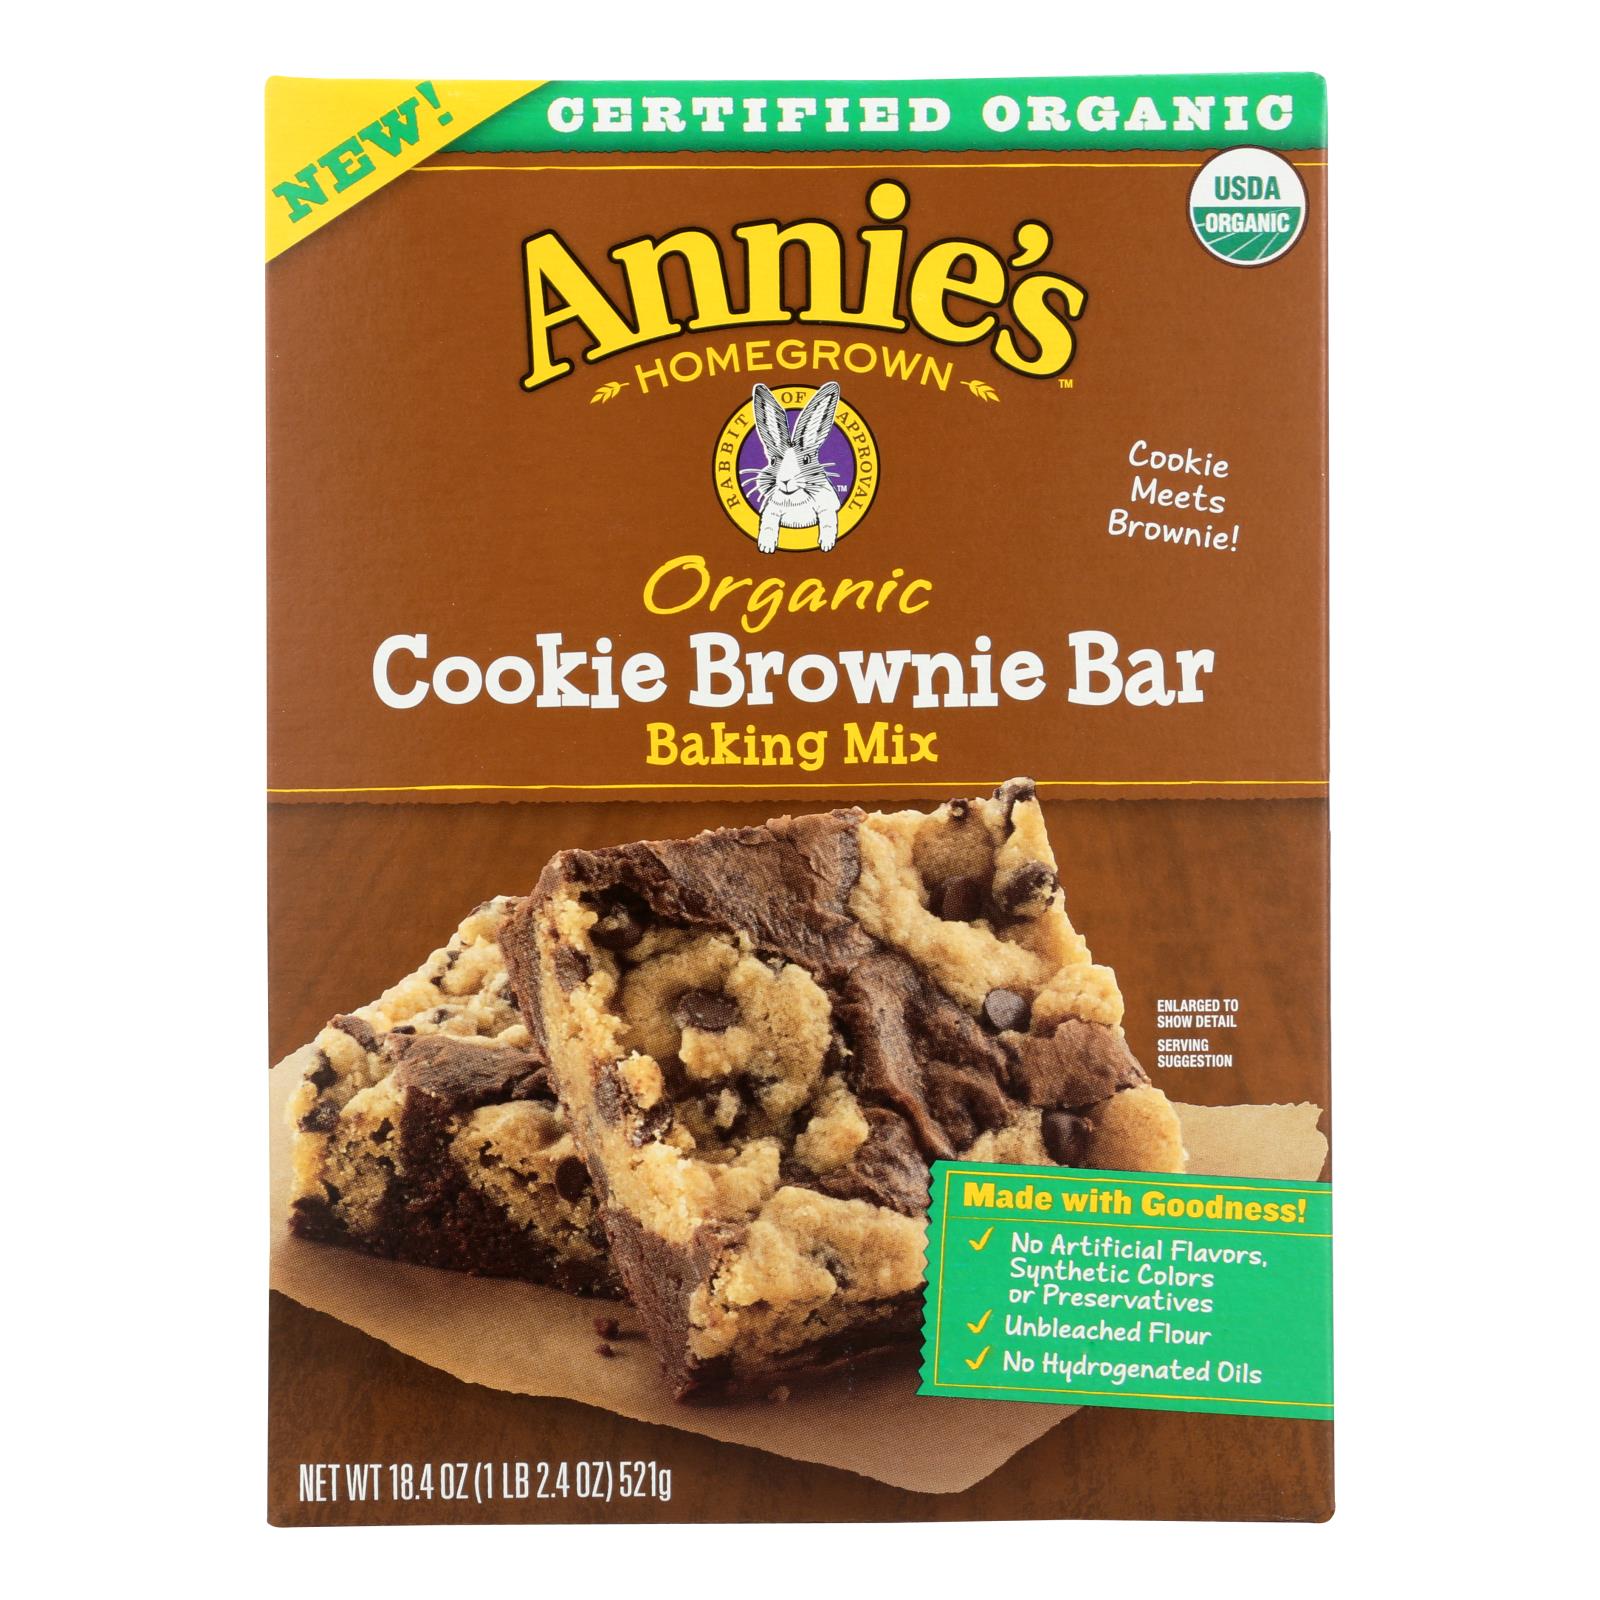 Annie's Homegrown, Make Annie's Cookie Bars, Brownie And - Case of 8 - 18.4 OZ (Pack of 8)